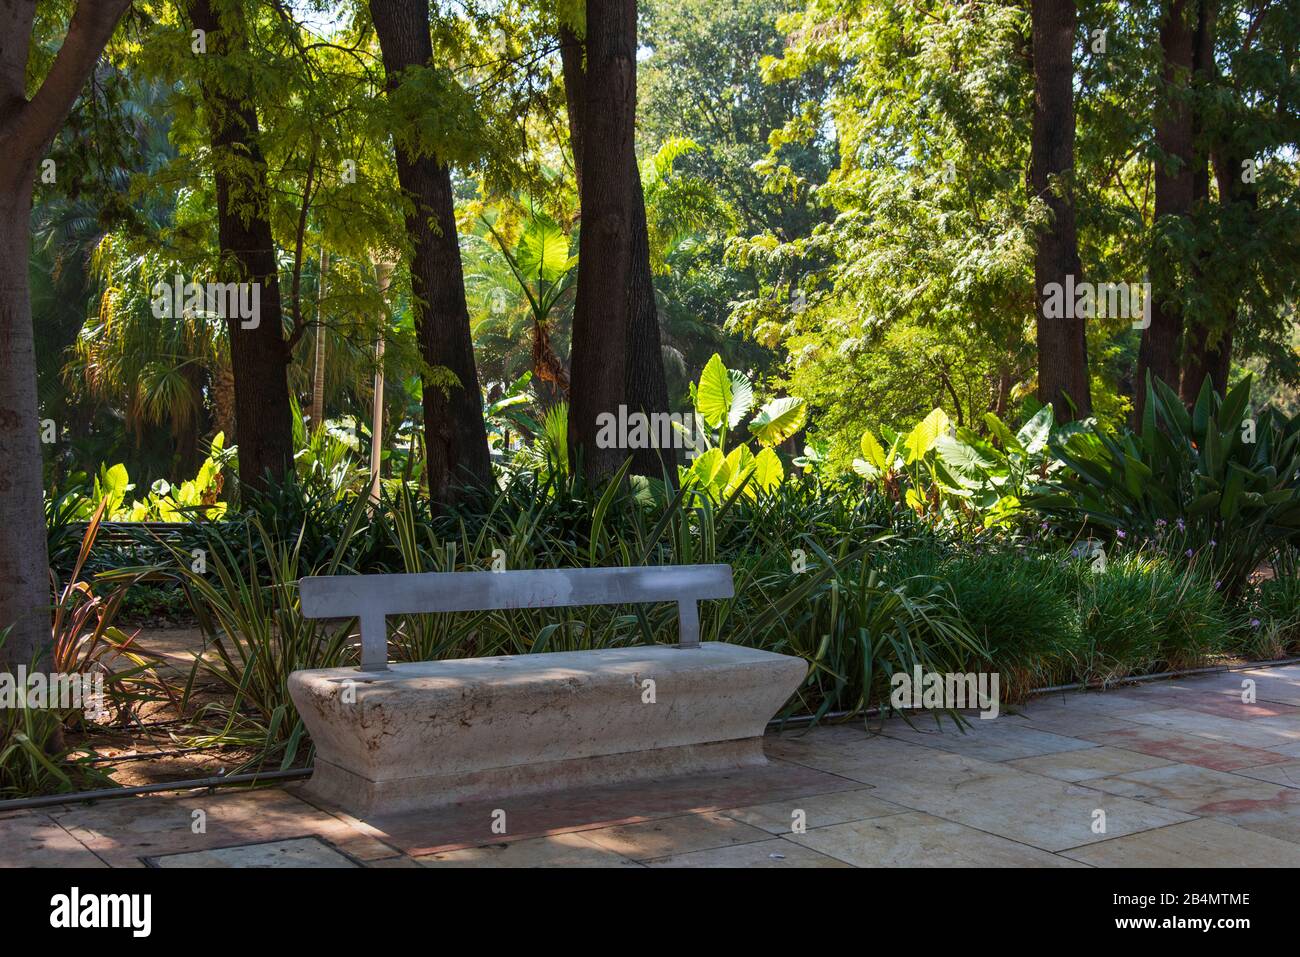 One day in Malaga; Impressions from this city in Andalusia, Spain. The gardens 'jardines de Pedro Luis Alonso'. An inviting concrete bench. Stock Photo